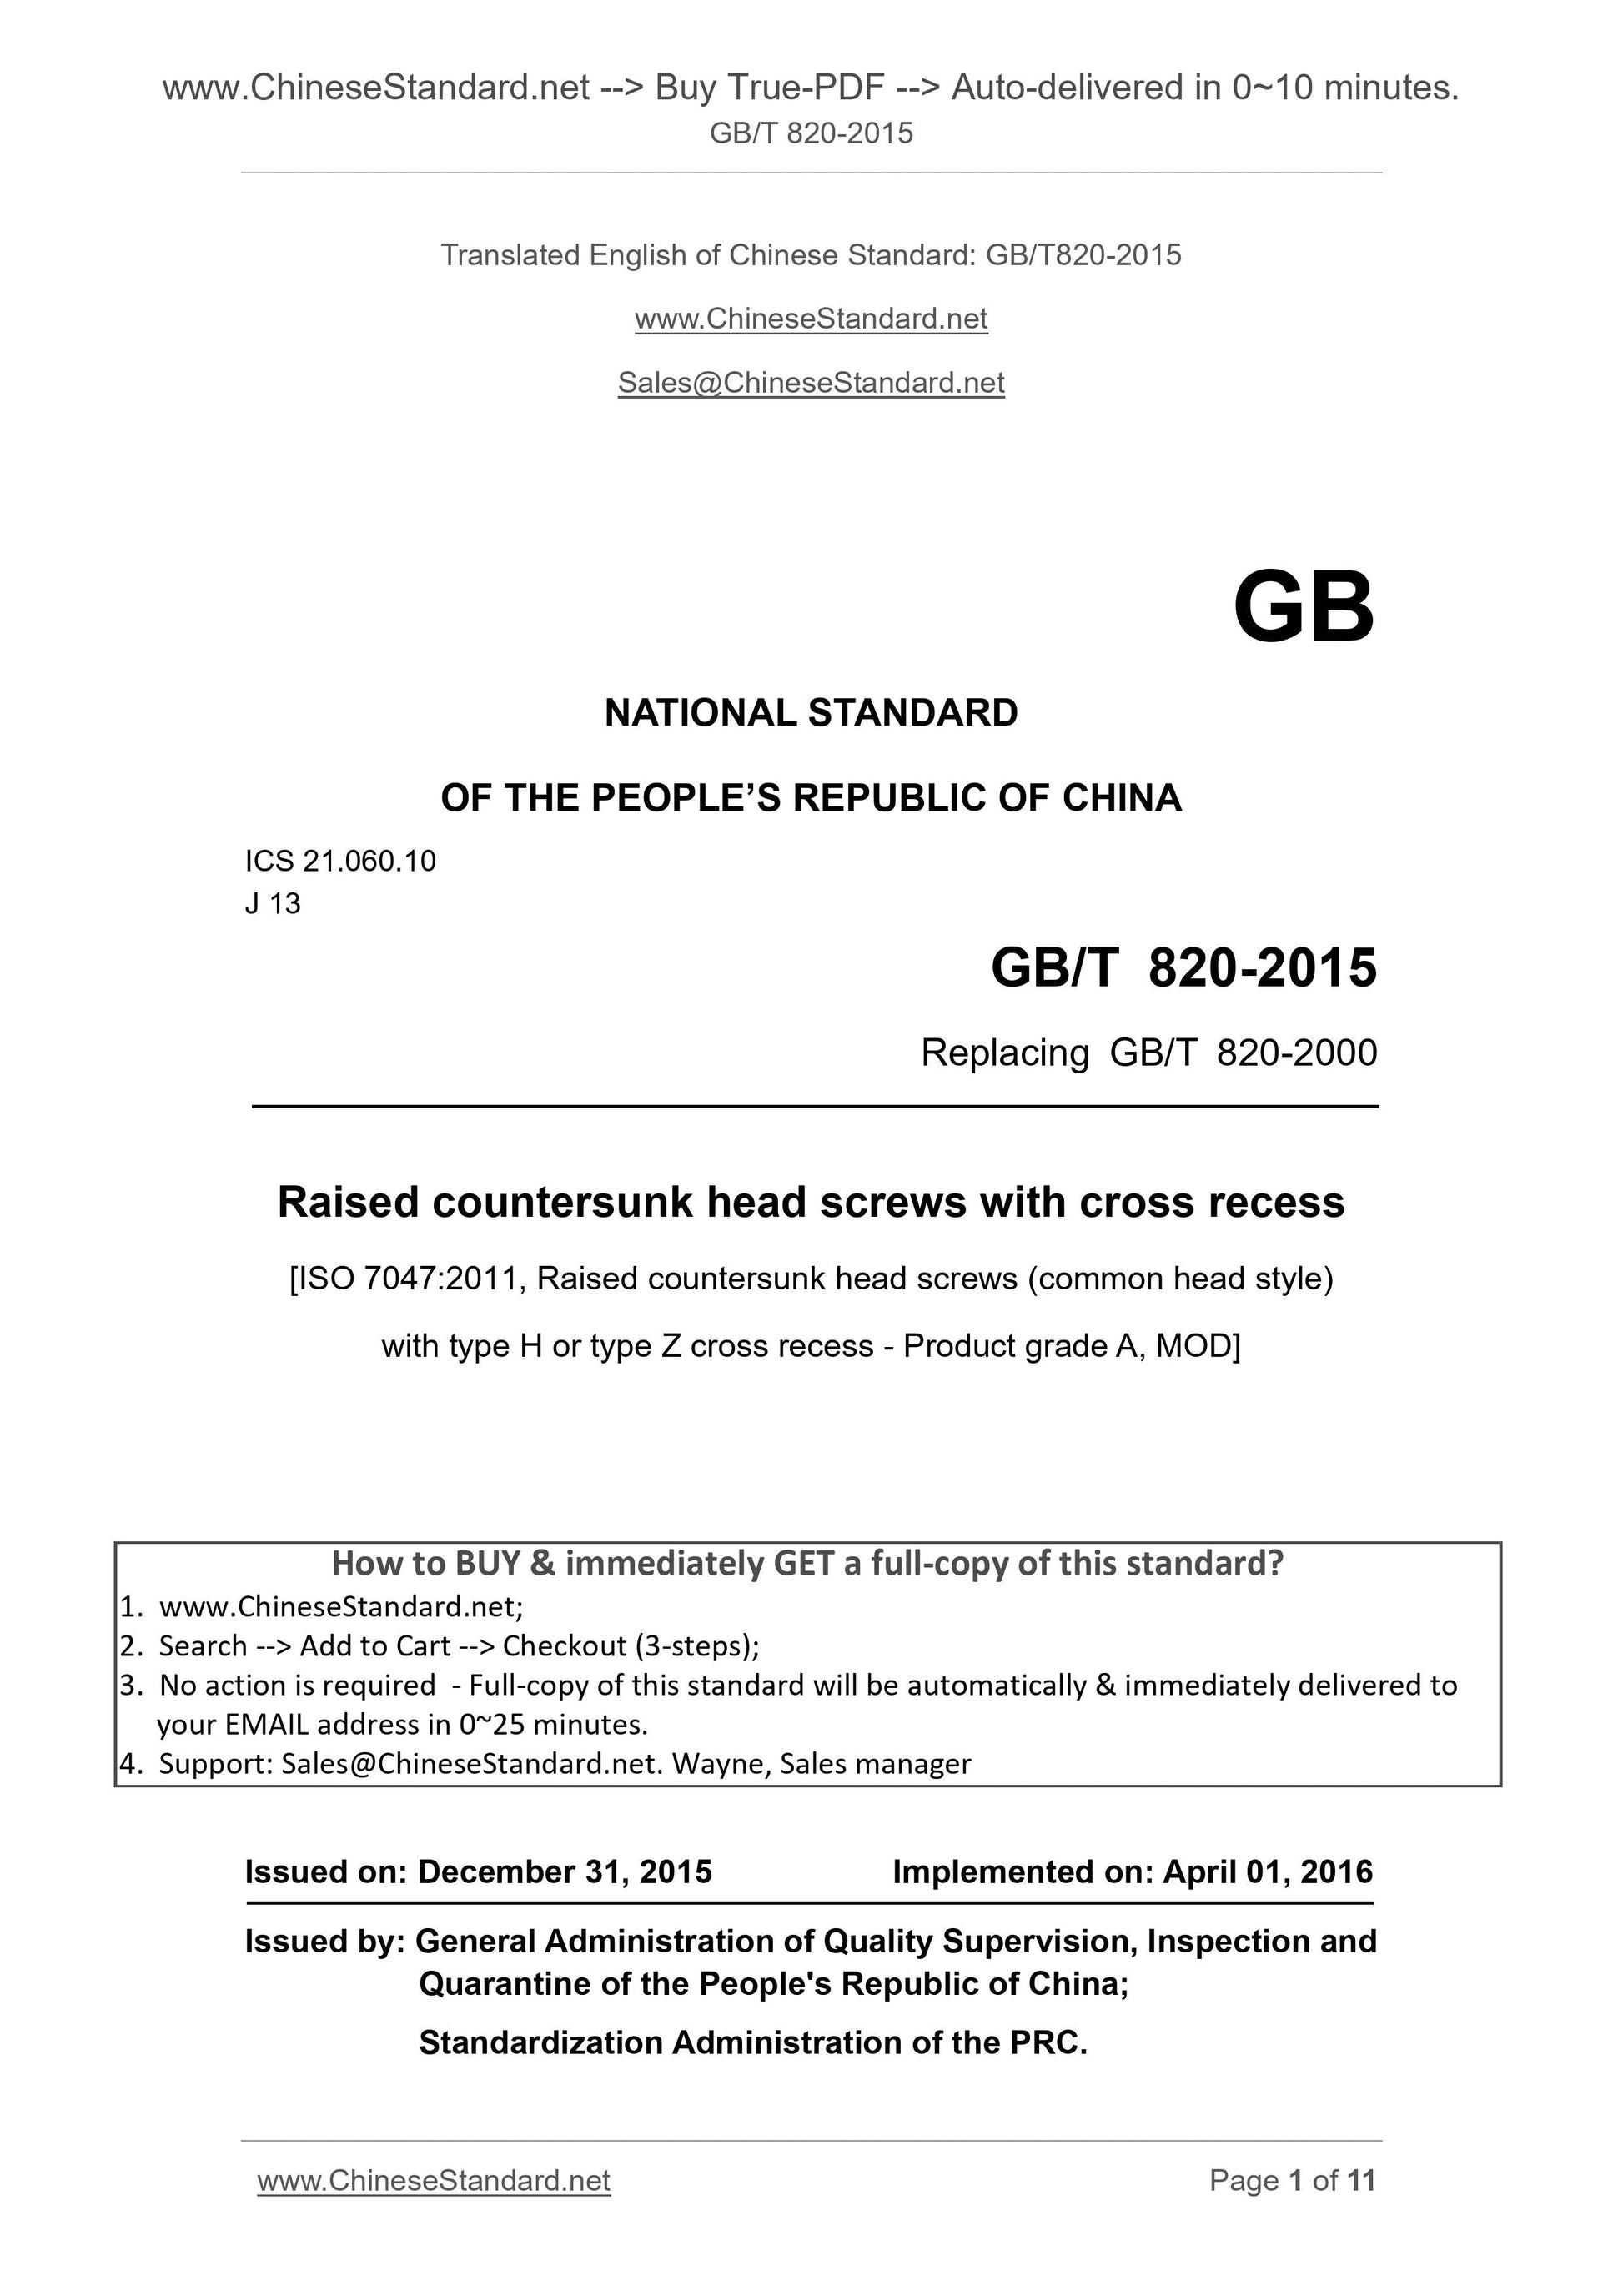 GB/T 820-2015 Page 1